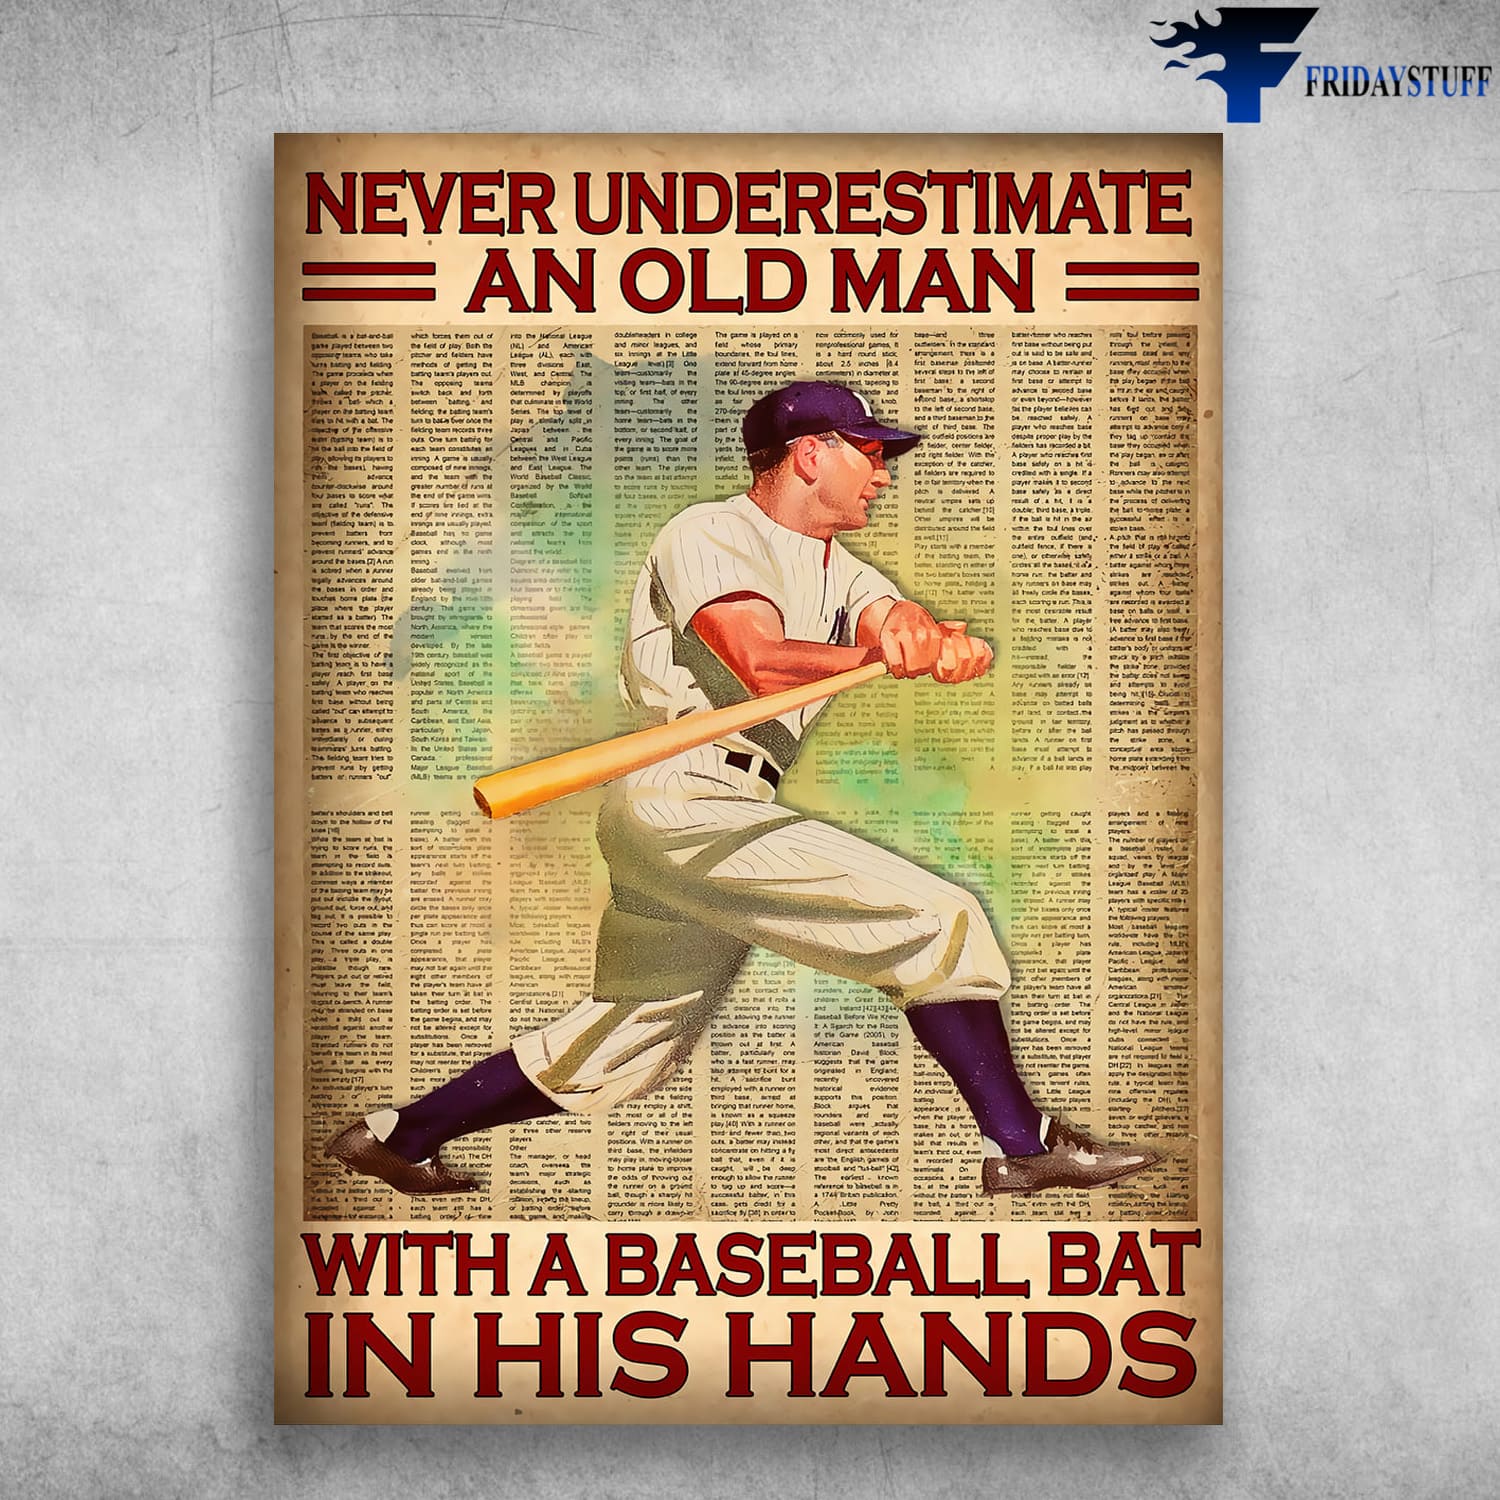 Baseball Player, Baseball Old Man, Never Underestimate An Old Man, With A Baseball Bat, In This Hands